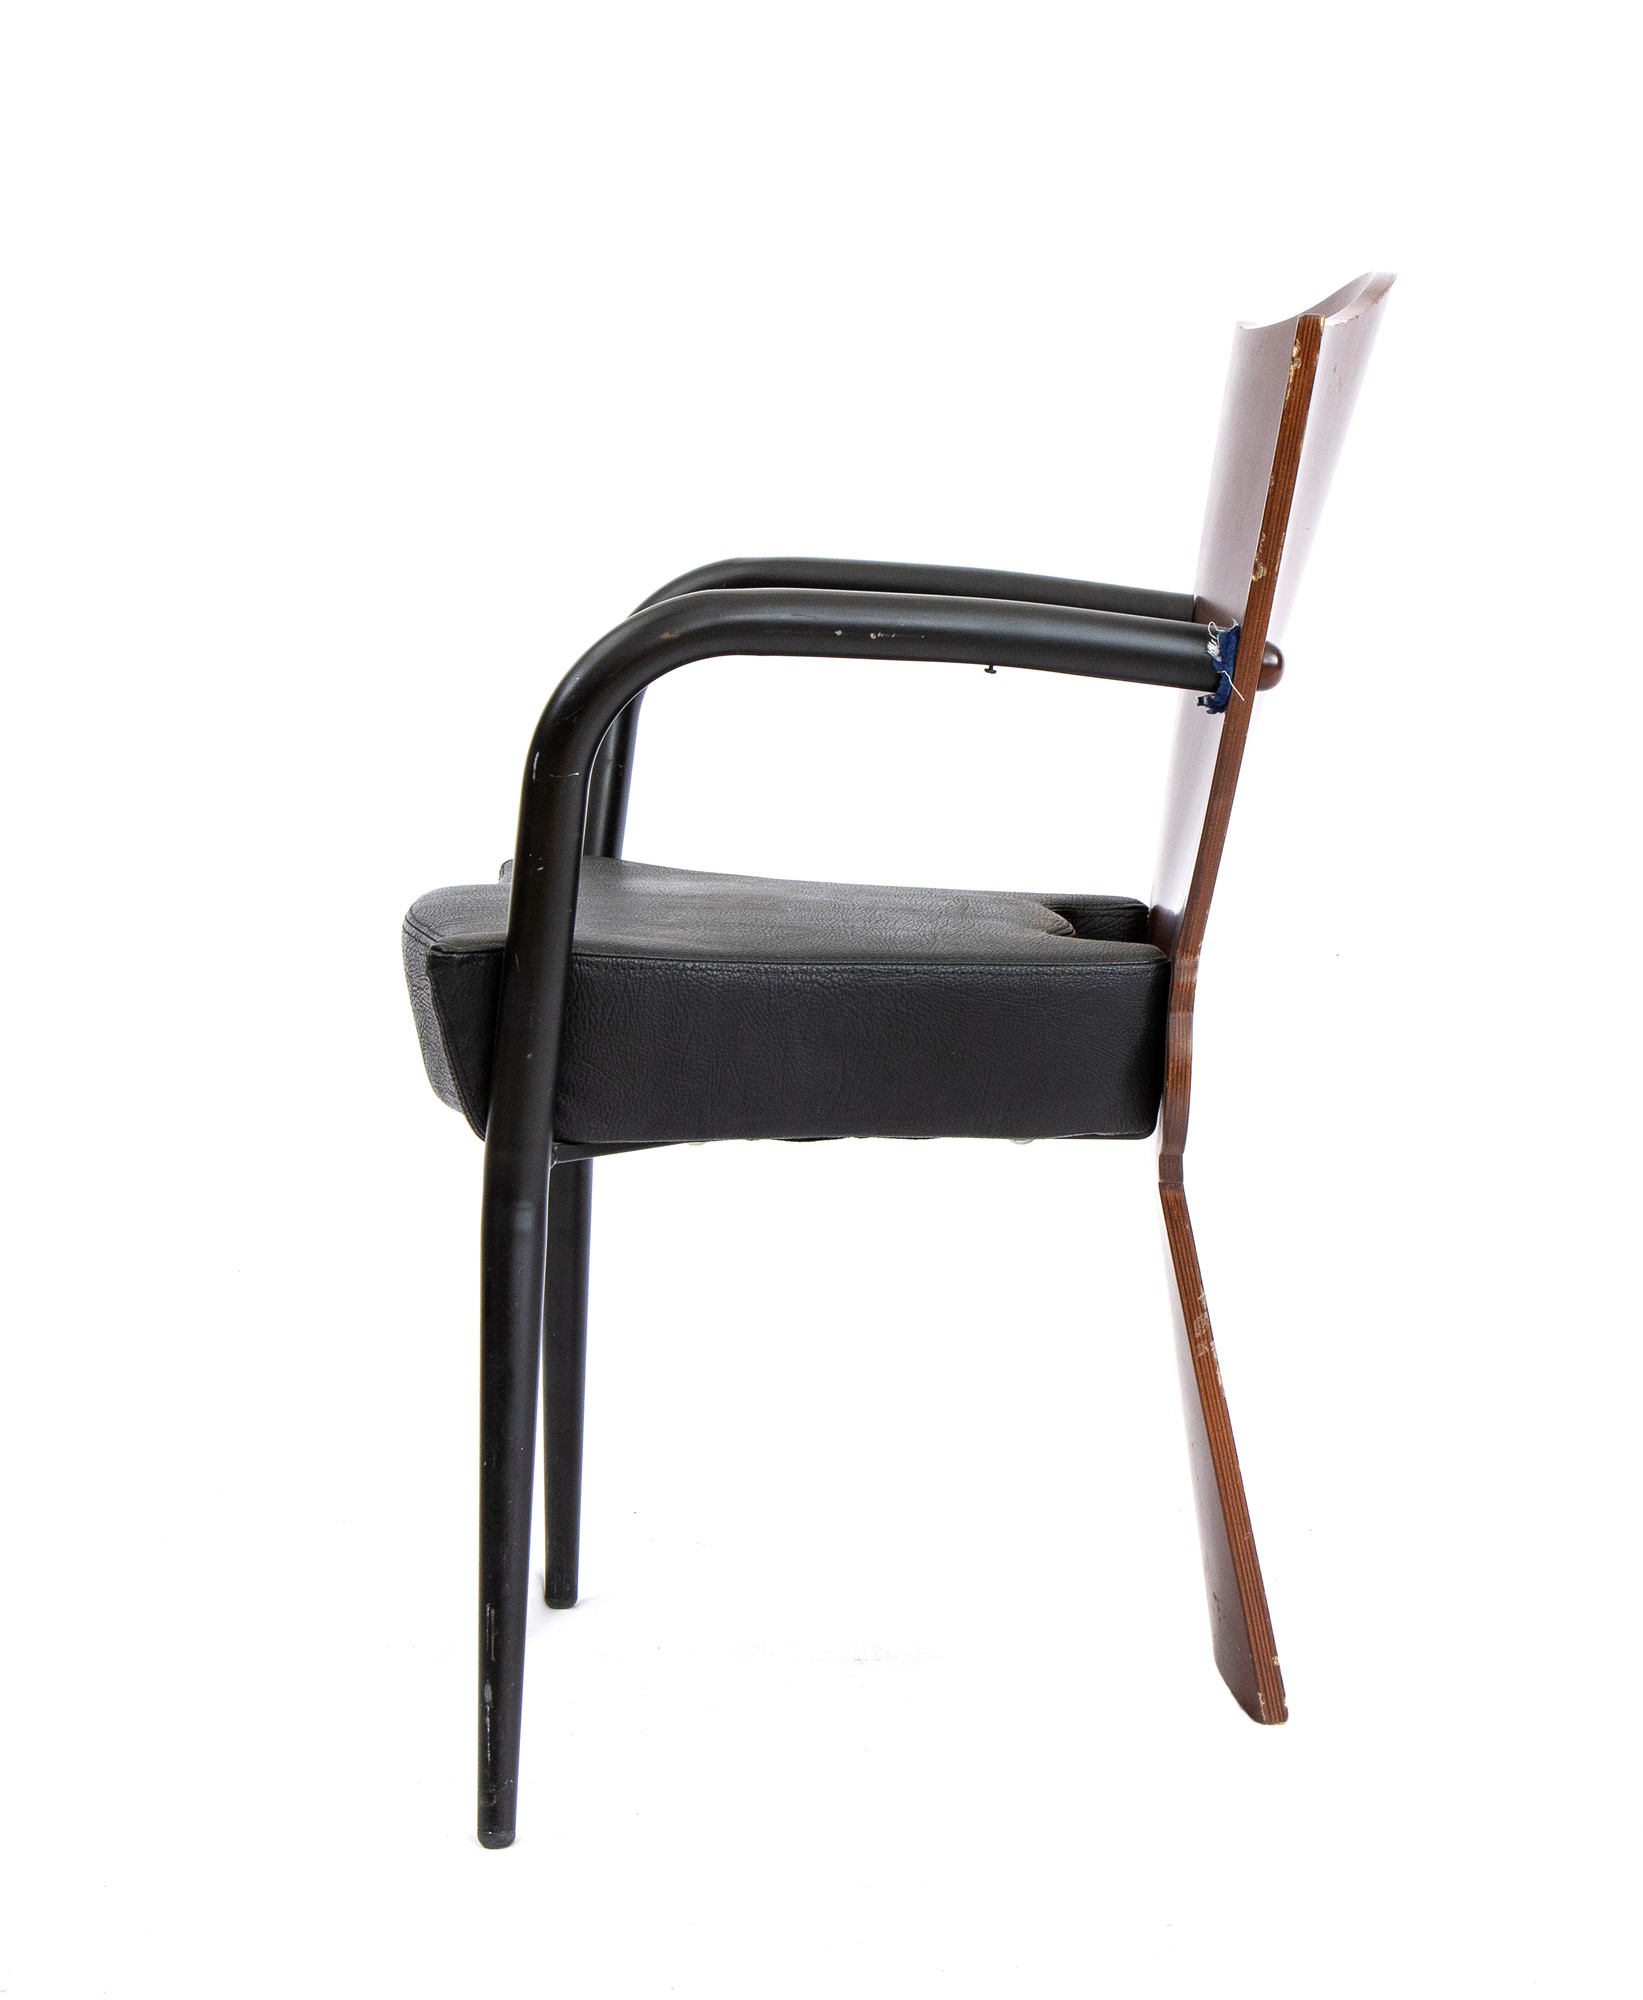 Four chairs mod. Dalami - Image 14 of 15